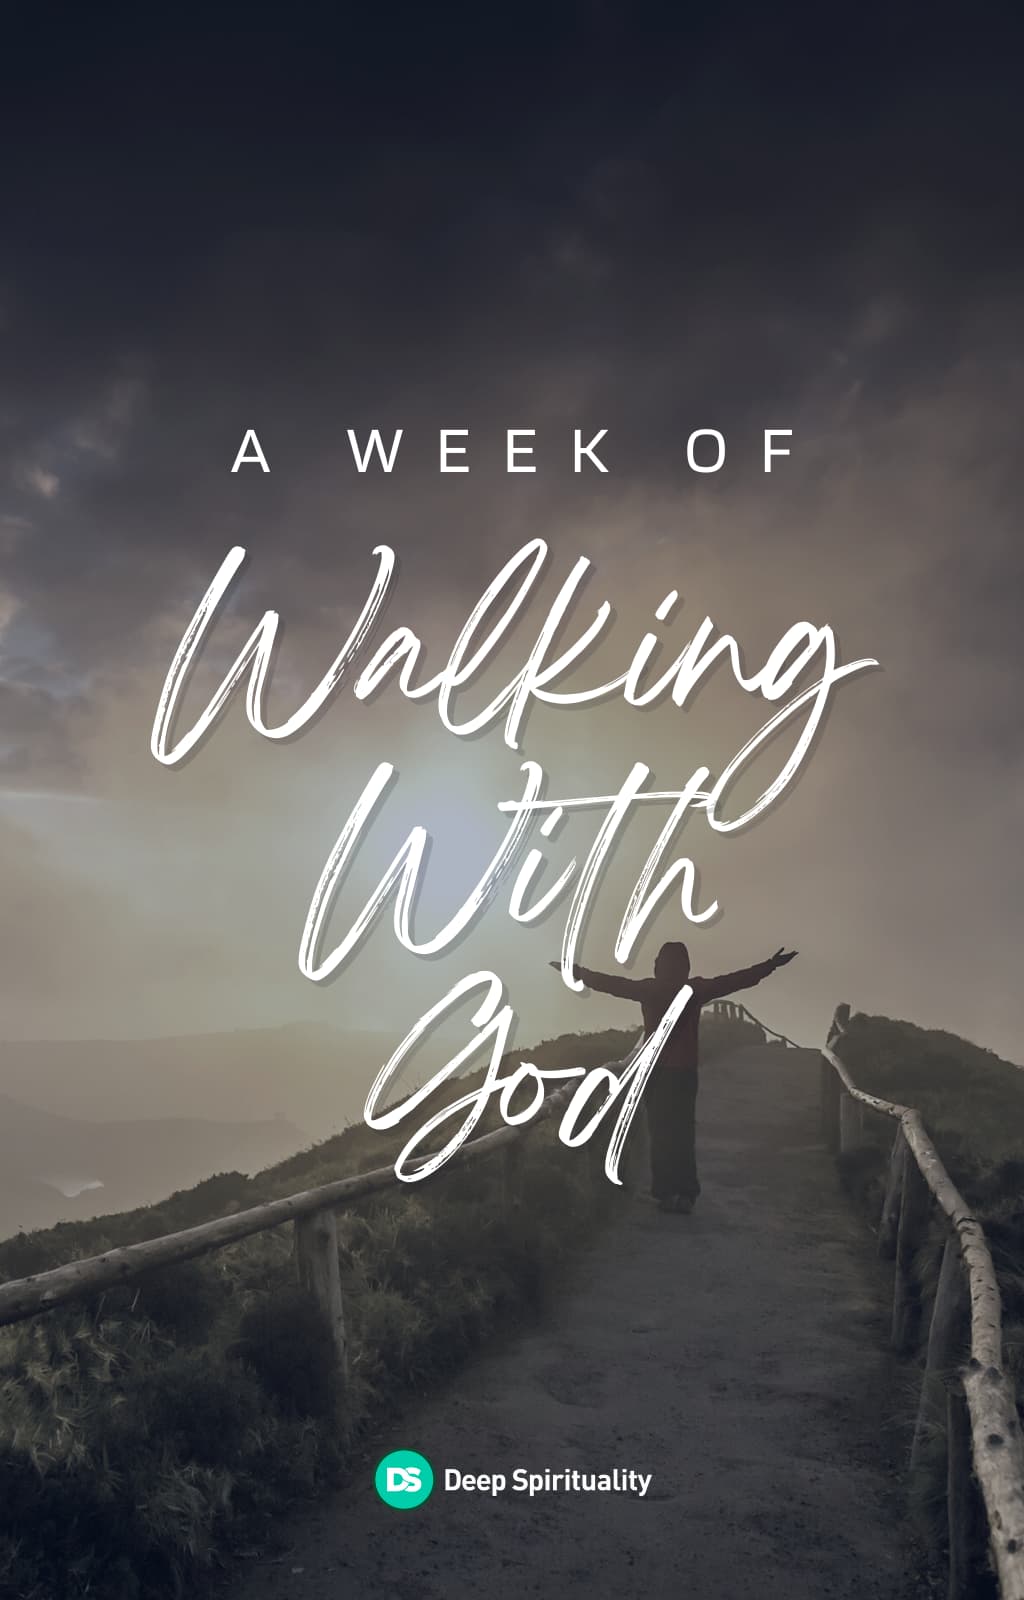 A Week of Walking with God 2